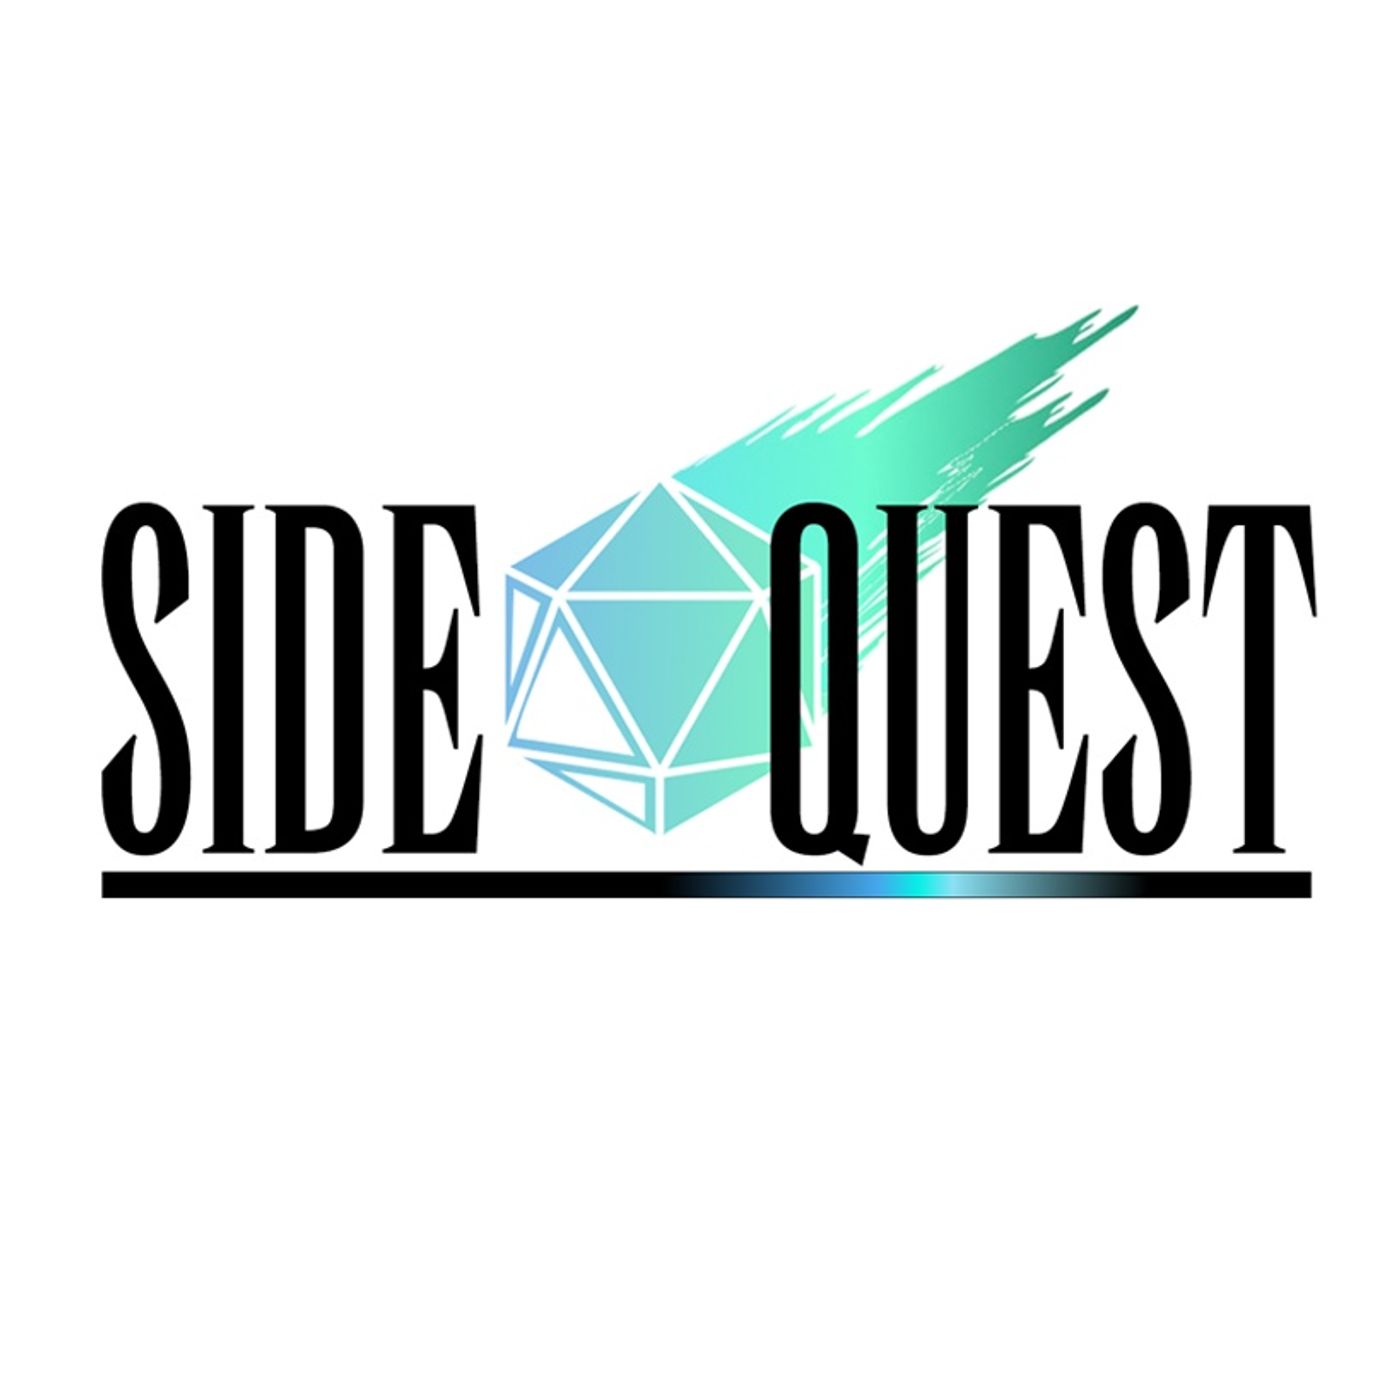 Side Quest 118: Marvel Malaise